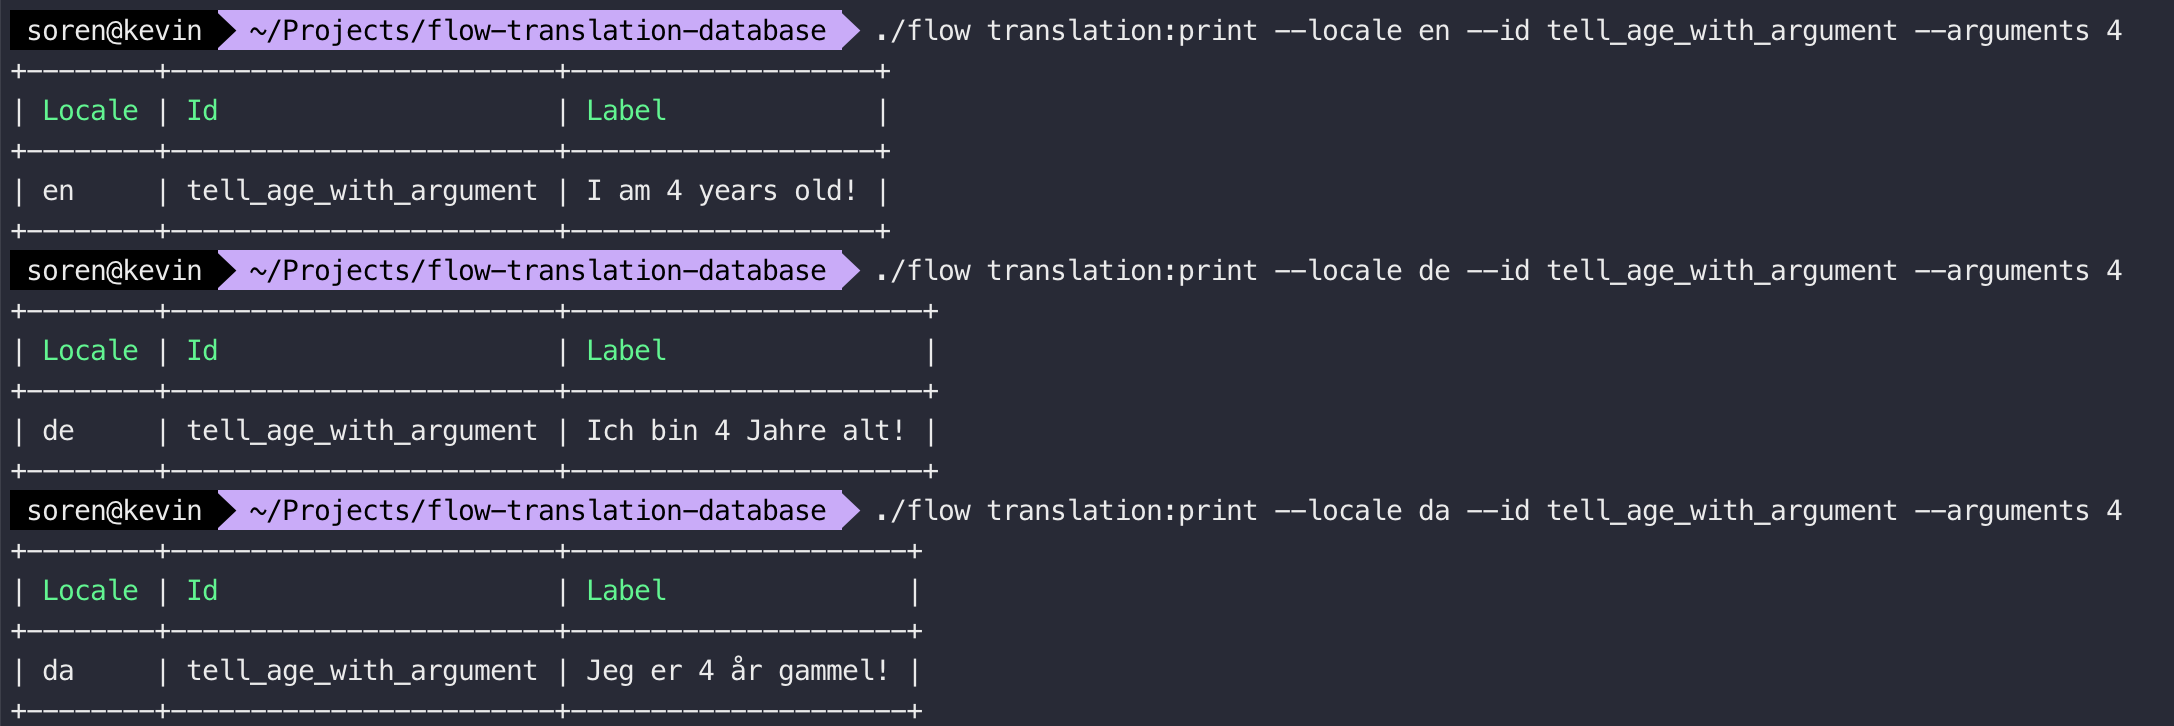 Print translation by locale and identifier including arguments